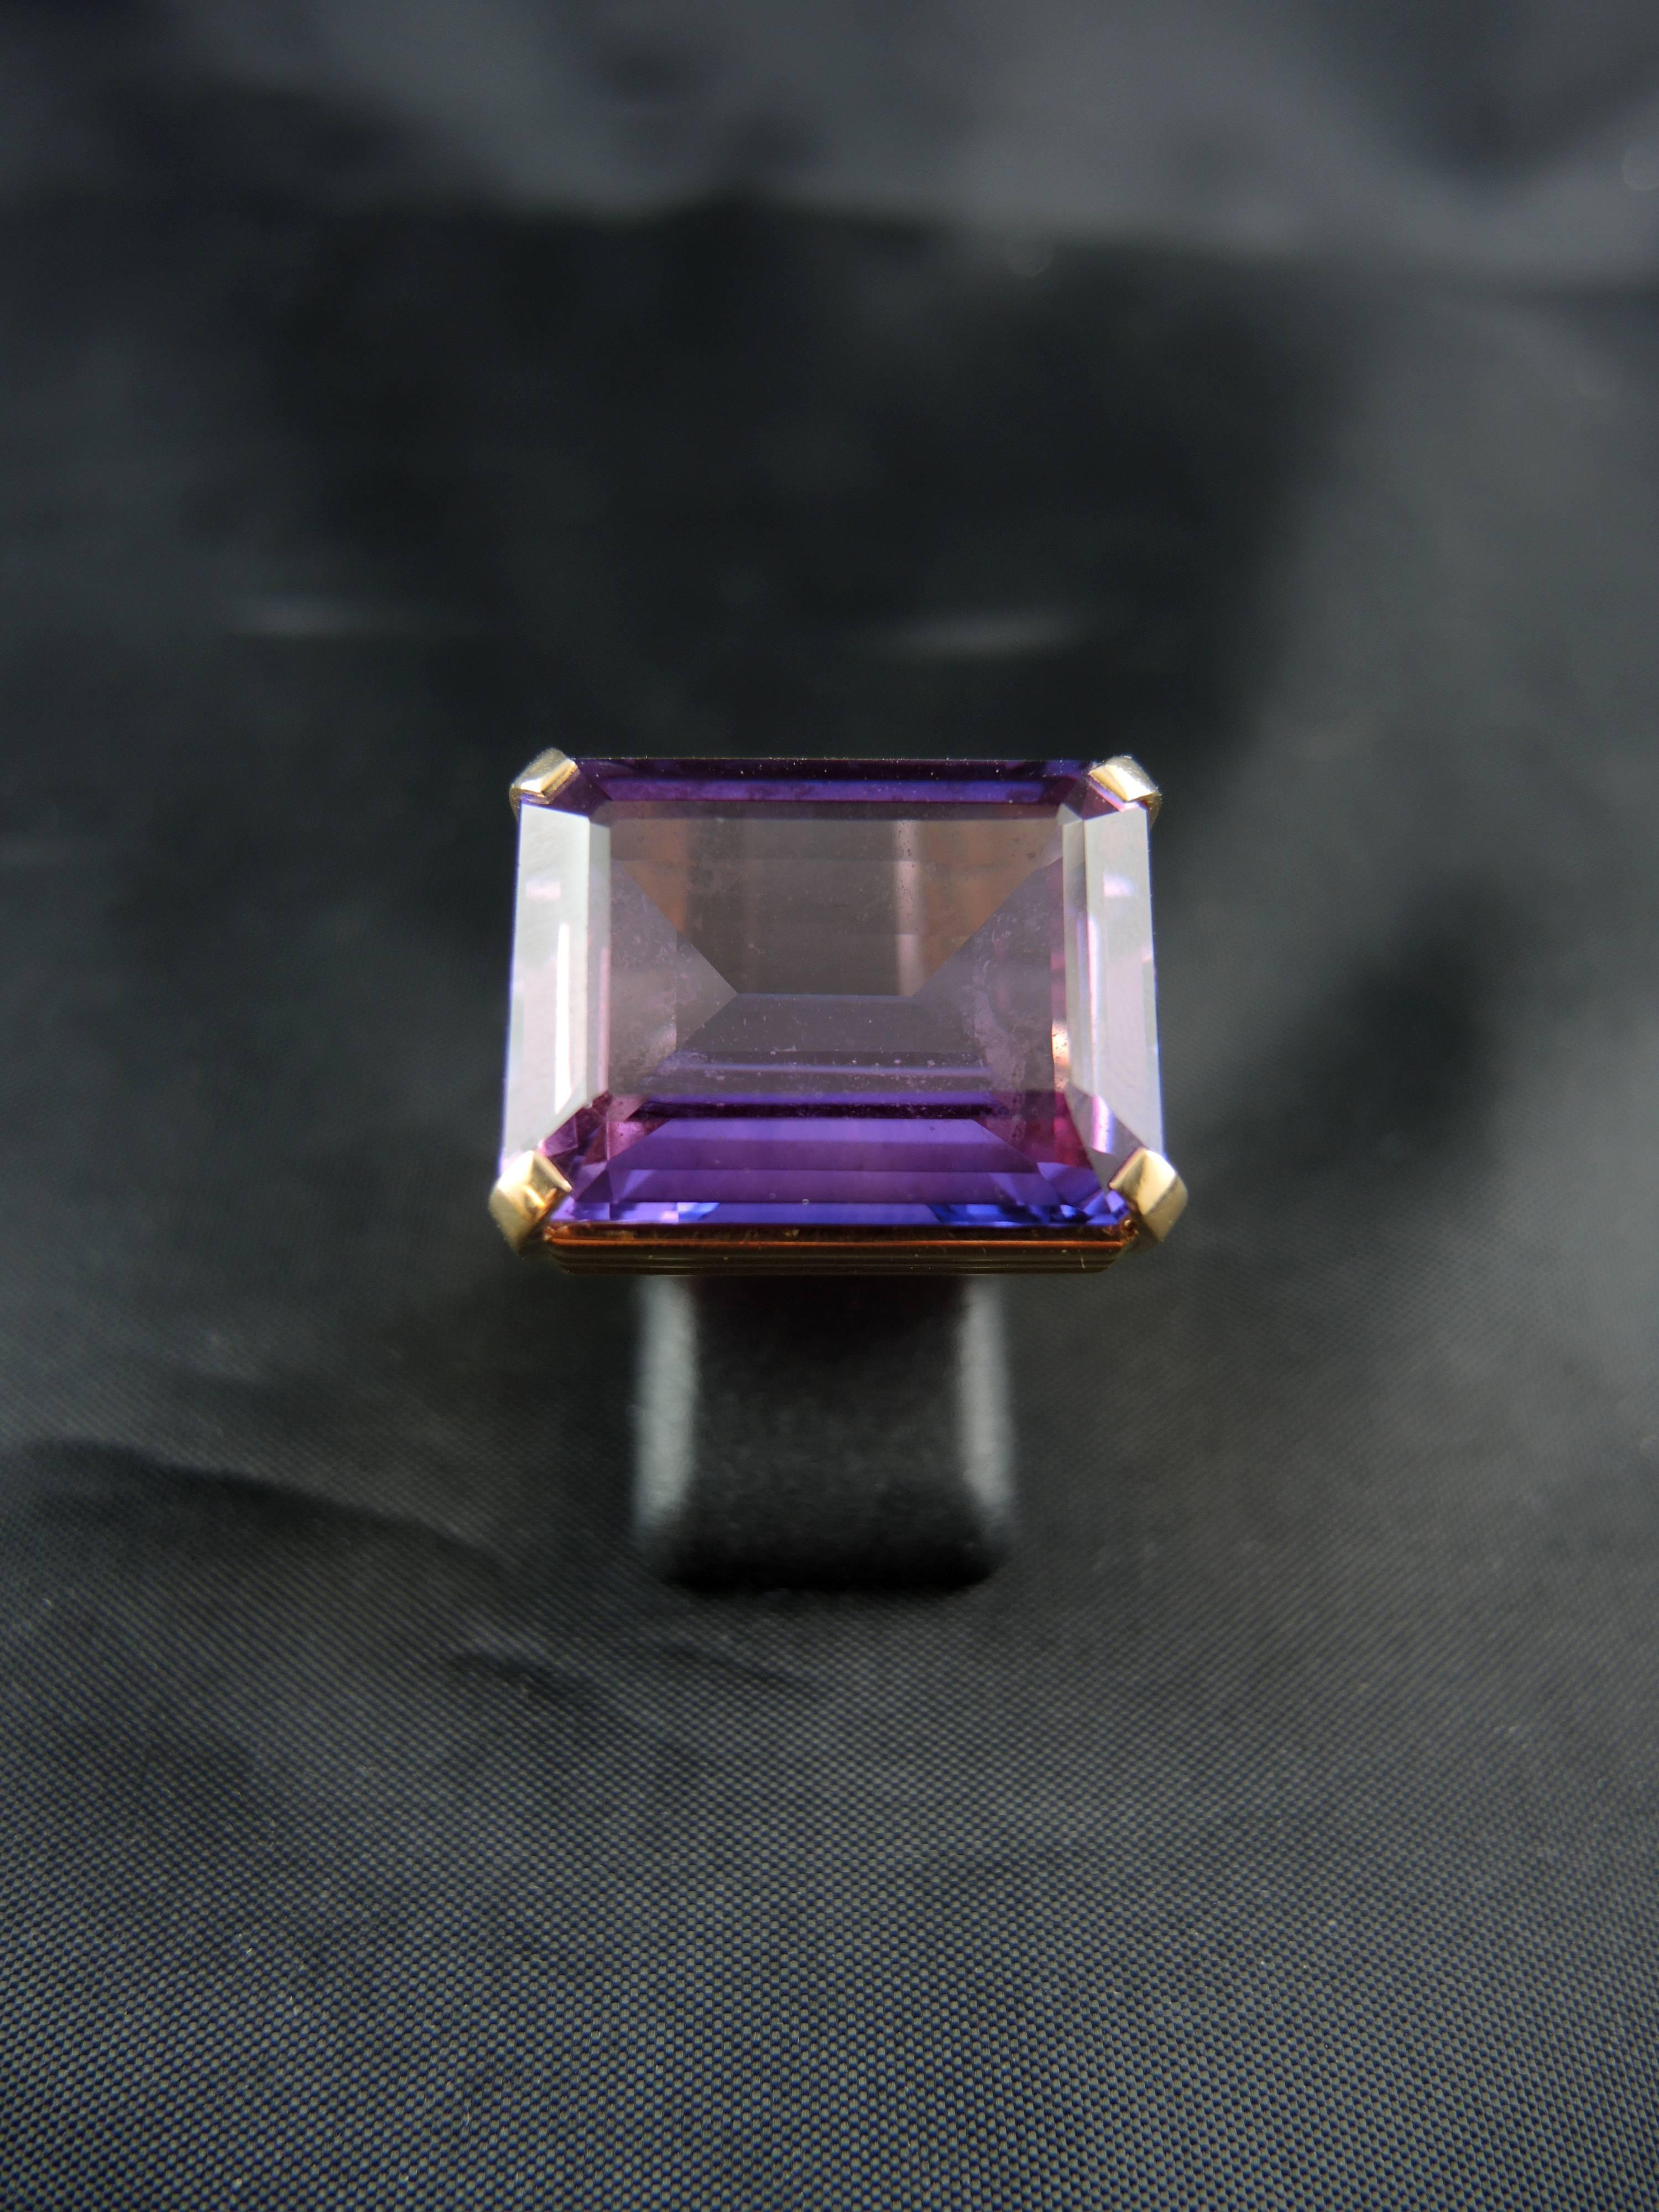 18Kt gold signet ring (quality mark: owl) with a stunning emerald cut amethyst.
The amehtyst is inclusion free, which explain why it cannot be natural certified, it may be a synthetic amethyst.

Circa 1975.

Weight: 17,80g
Ring size: 51 (diameter